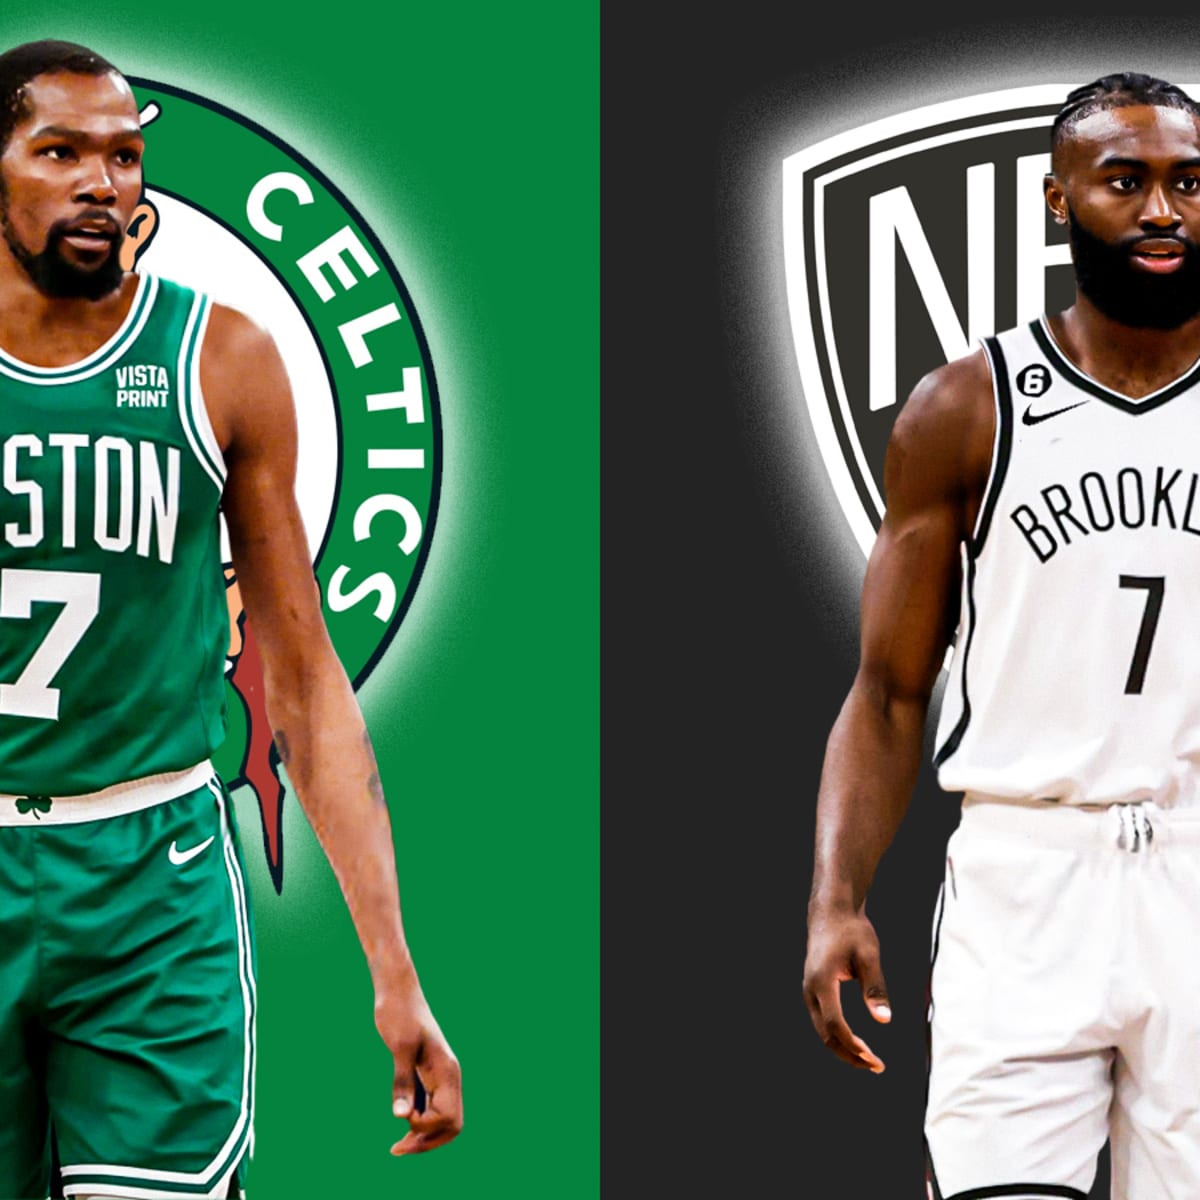 Edelman attempts to recruit Durant with custom Celtics jersey